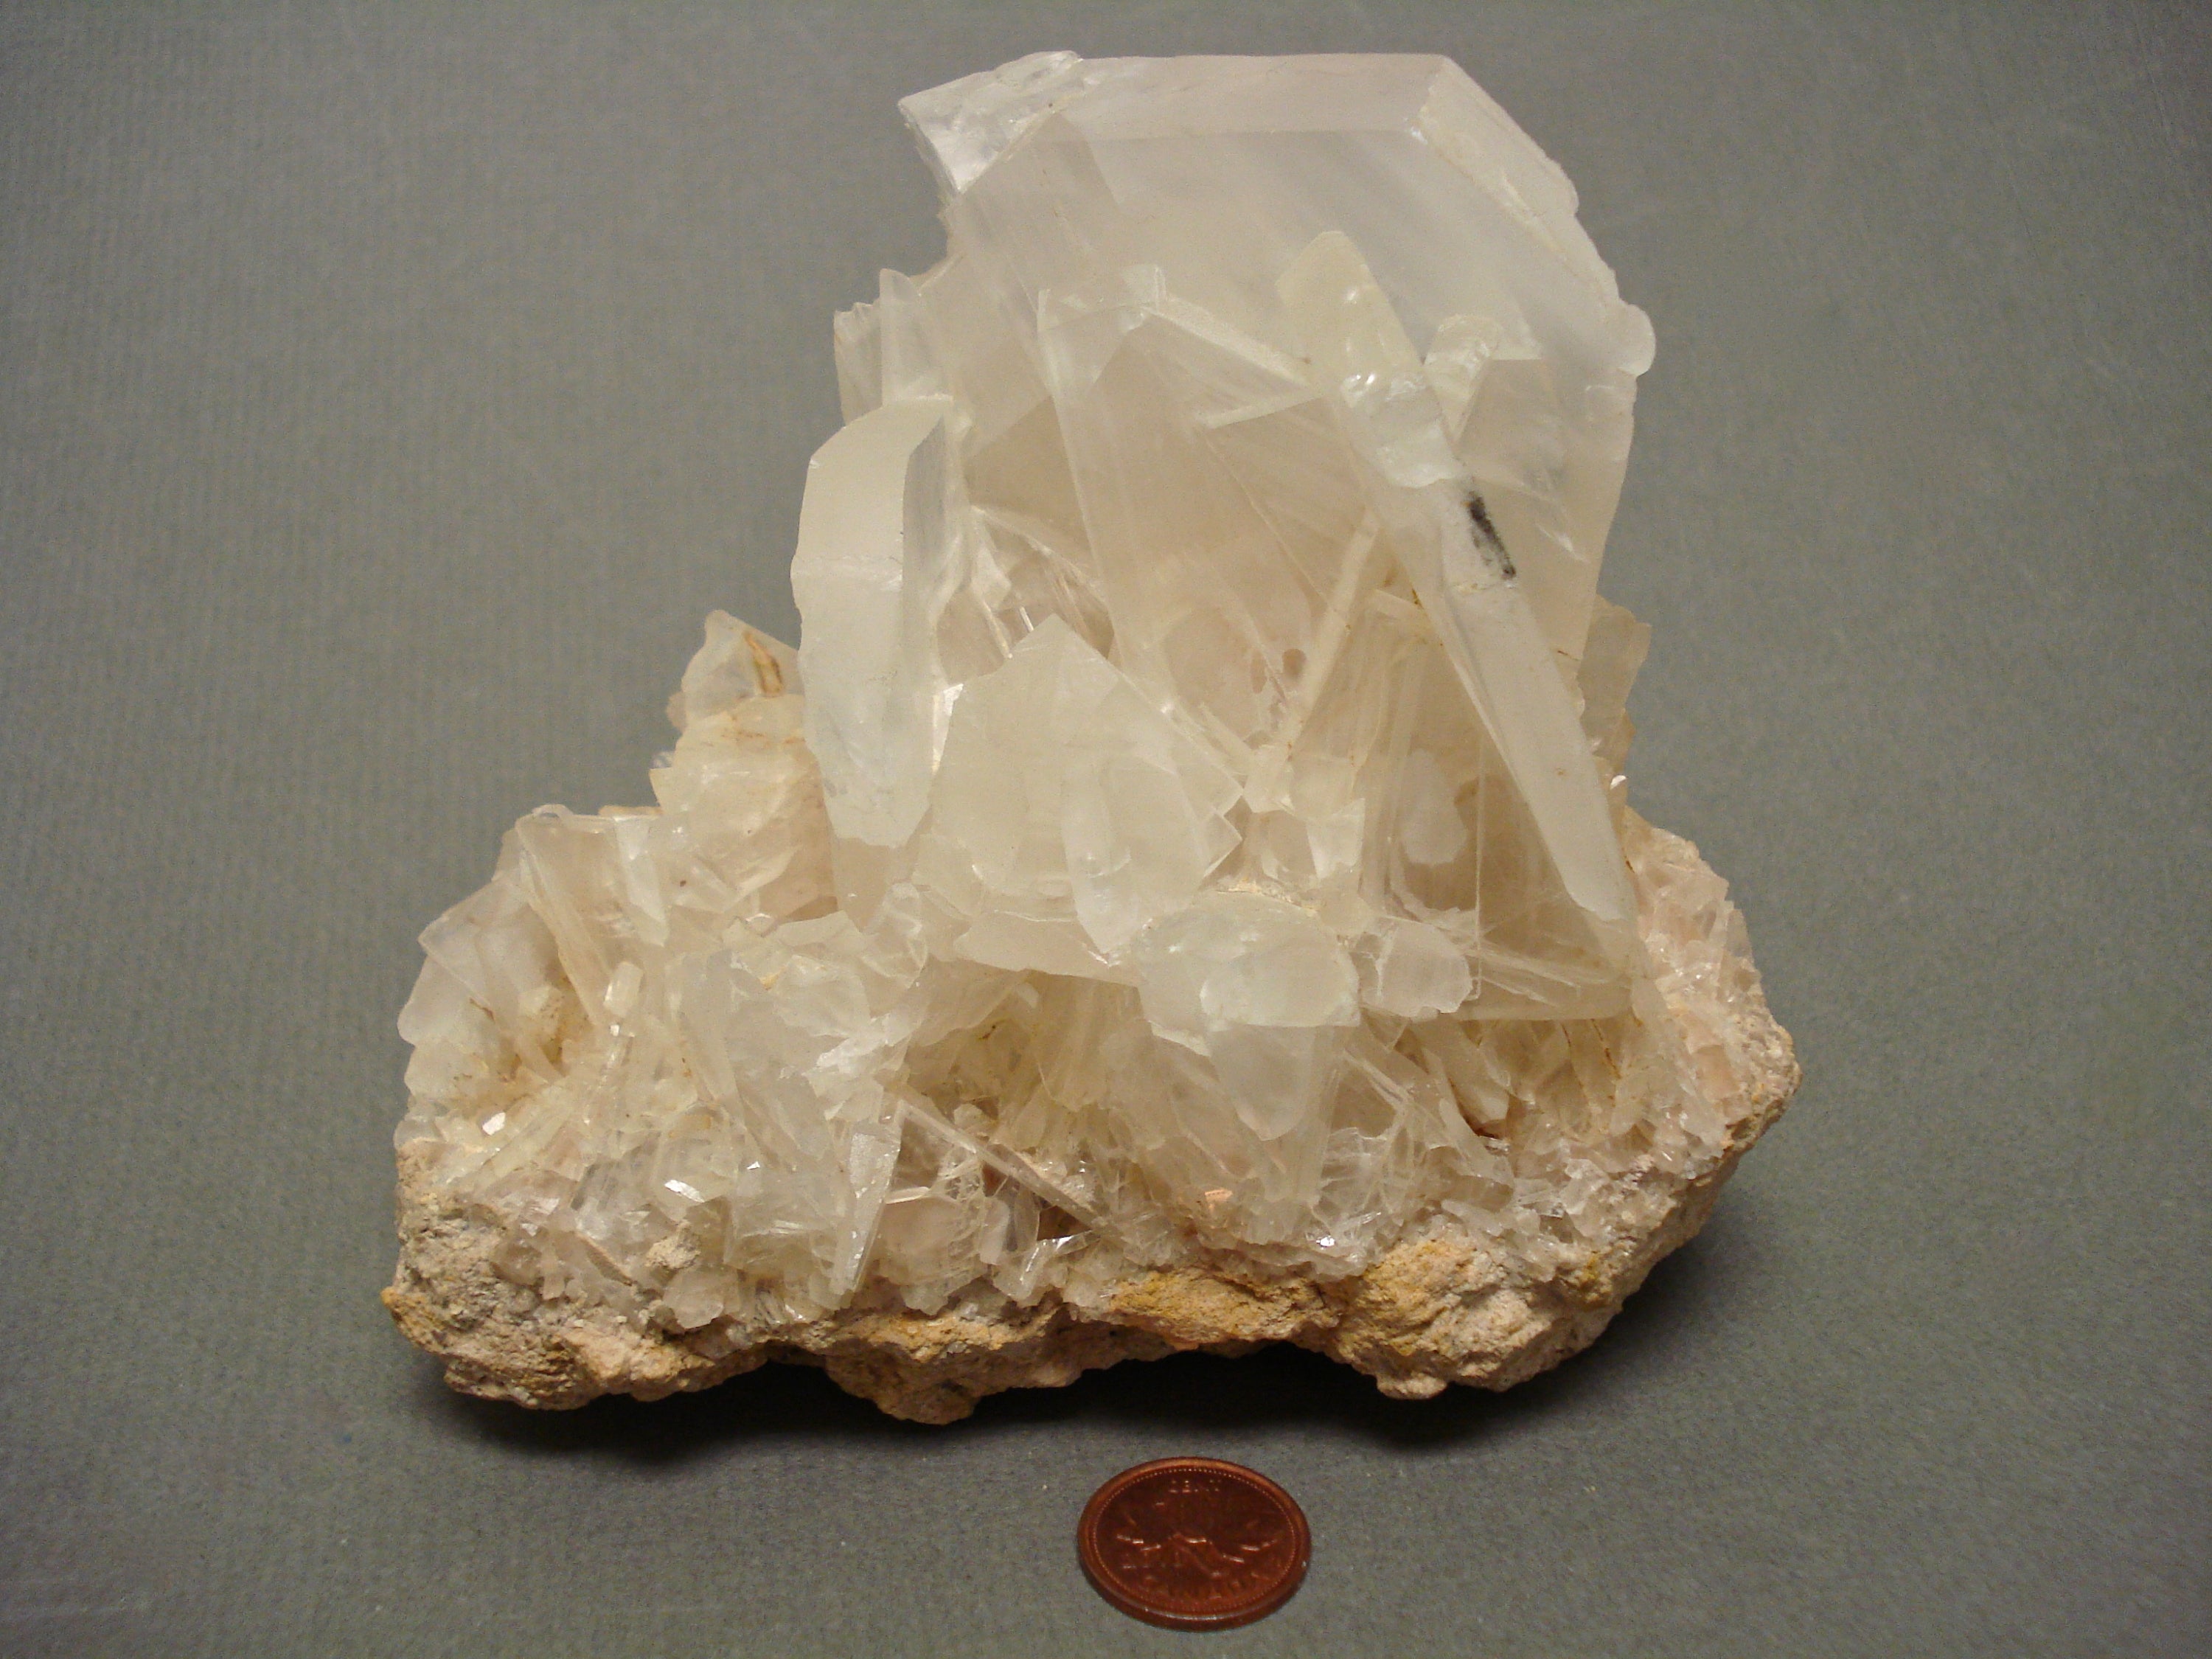 Calcite next to a penny for size comparison